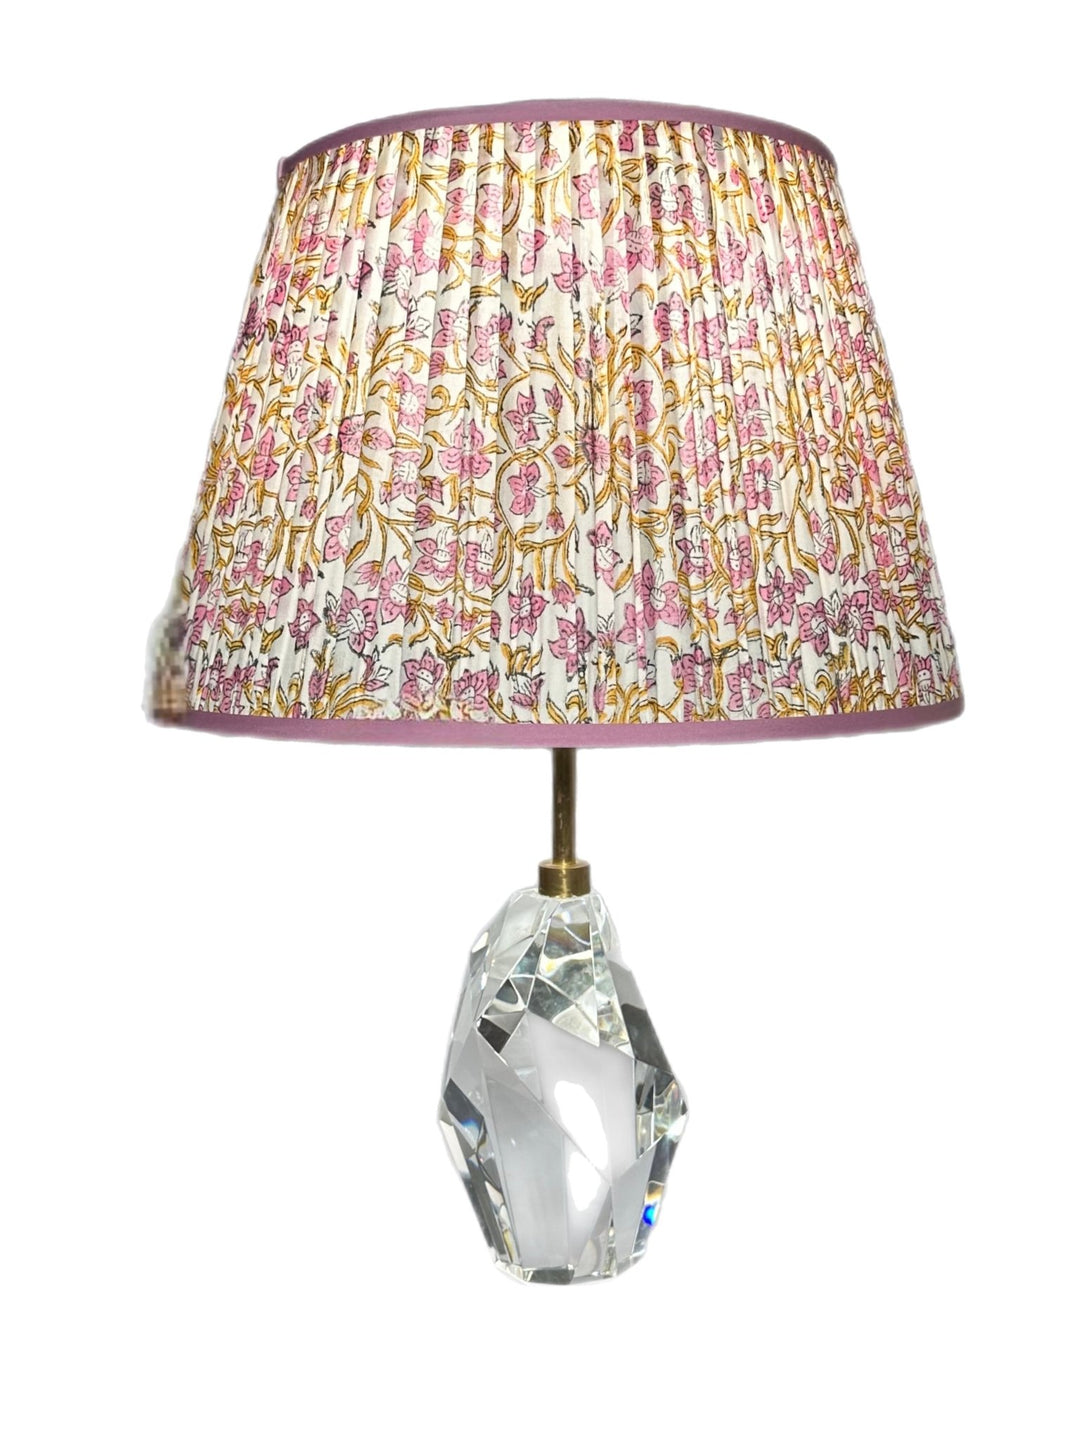 Gathered Pembroke - Floral with Pink Trim - Lux Lamp Shades